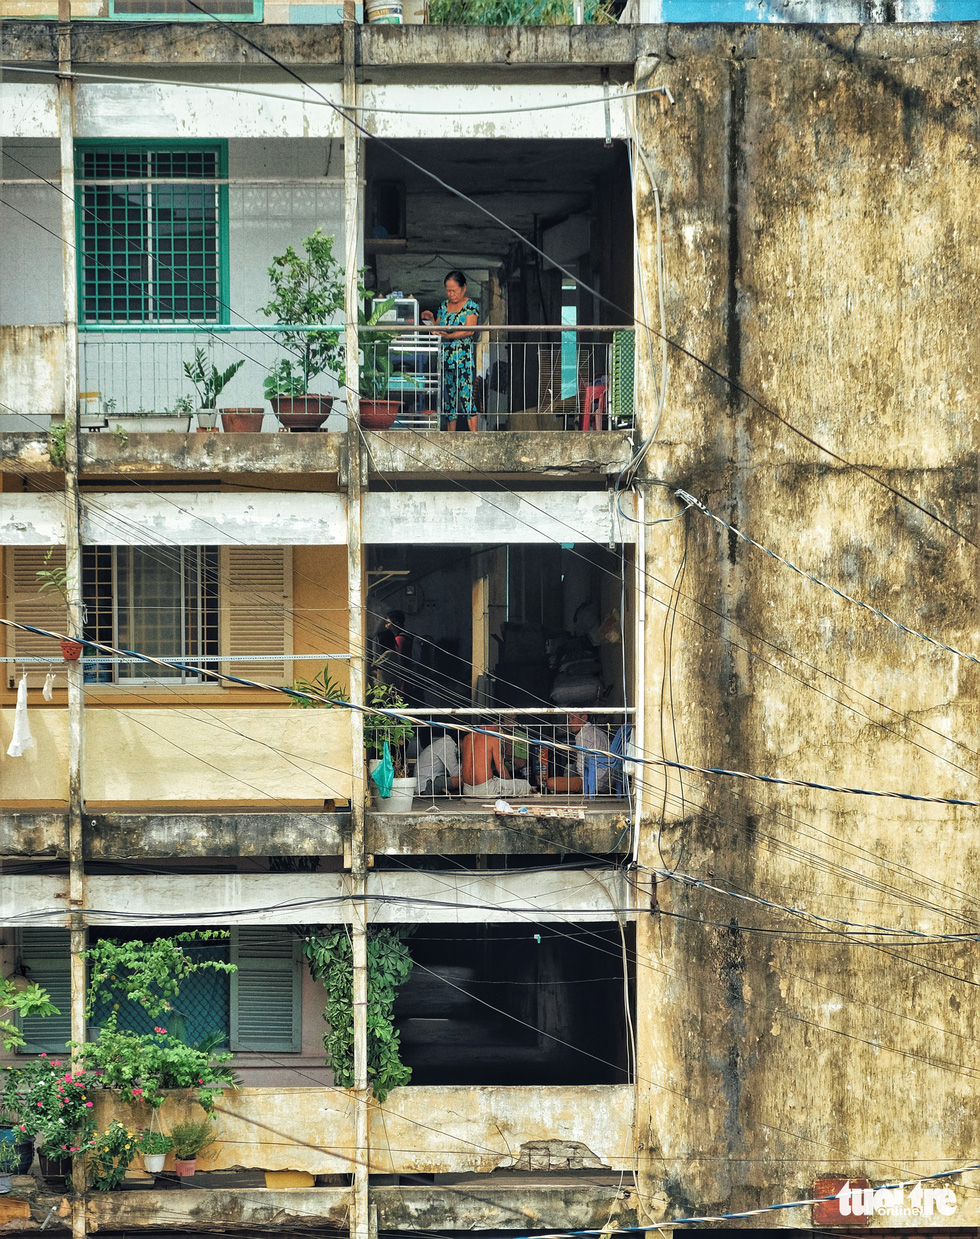 Images of a dilapidated apartments in Ho Chi Minh City